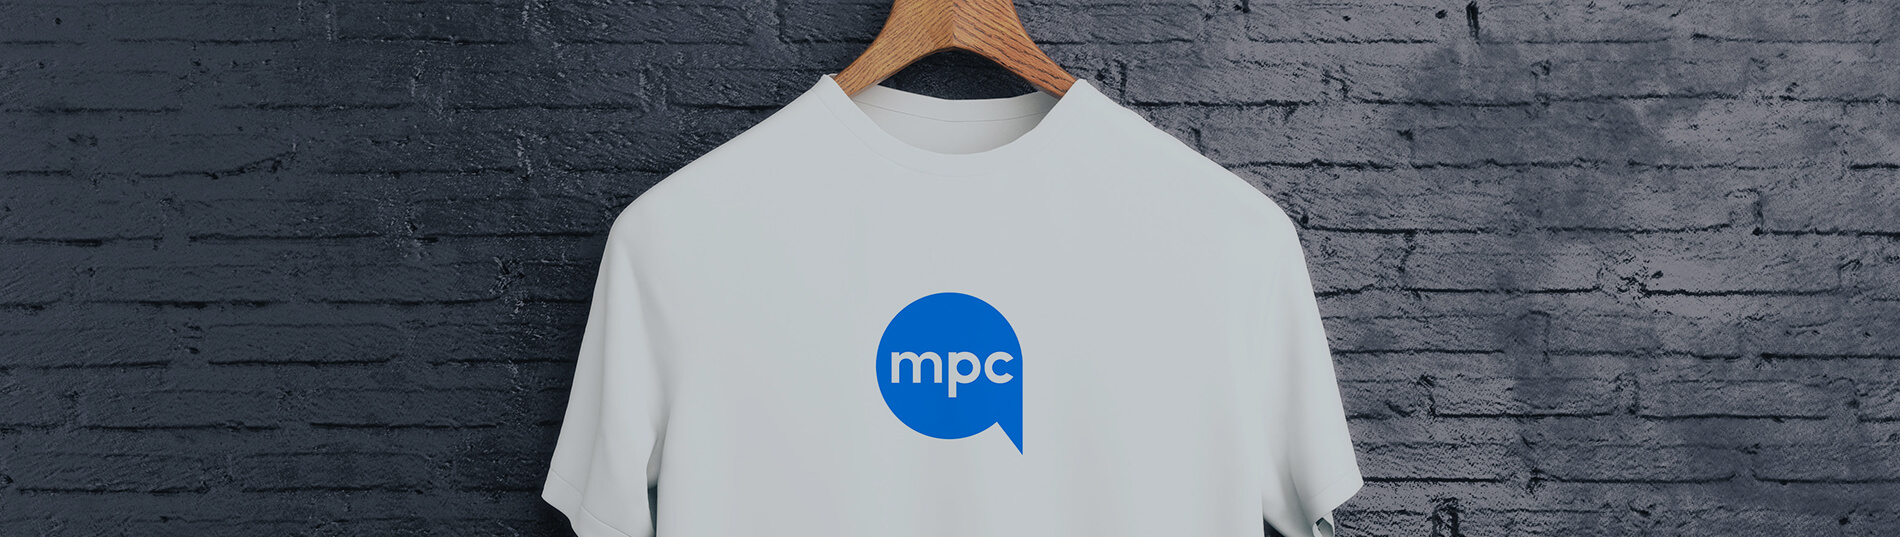 MPC Promotions t-shirt